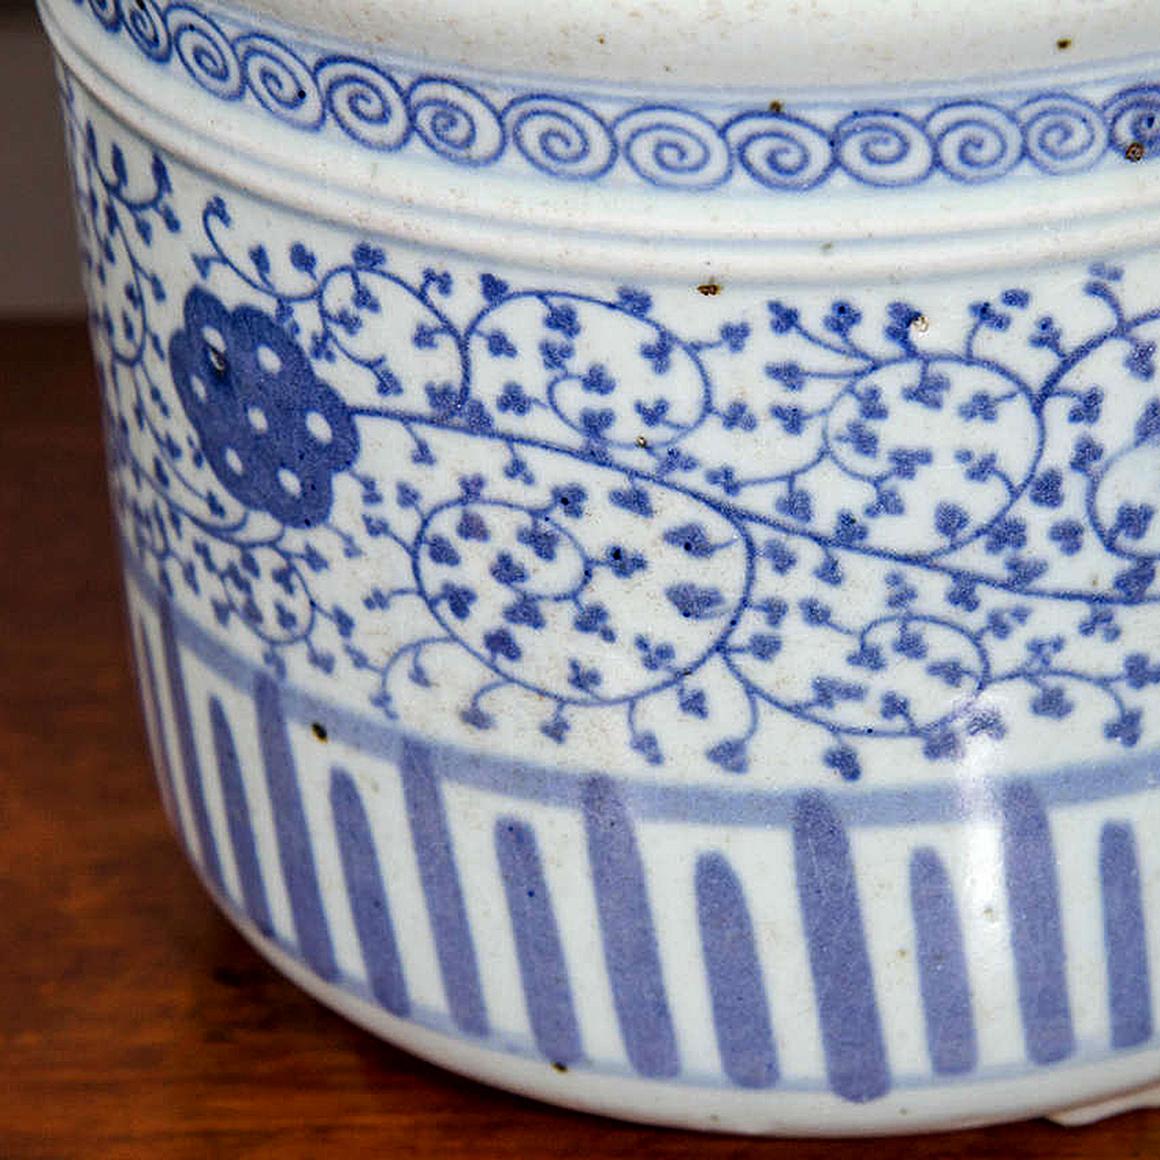 Pair of Chinese Blue and White Porcelain Planters (20. Jahrhundert)